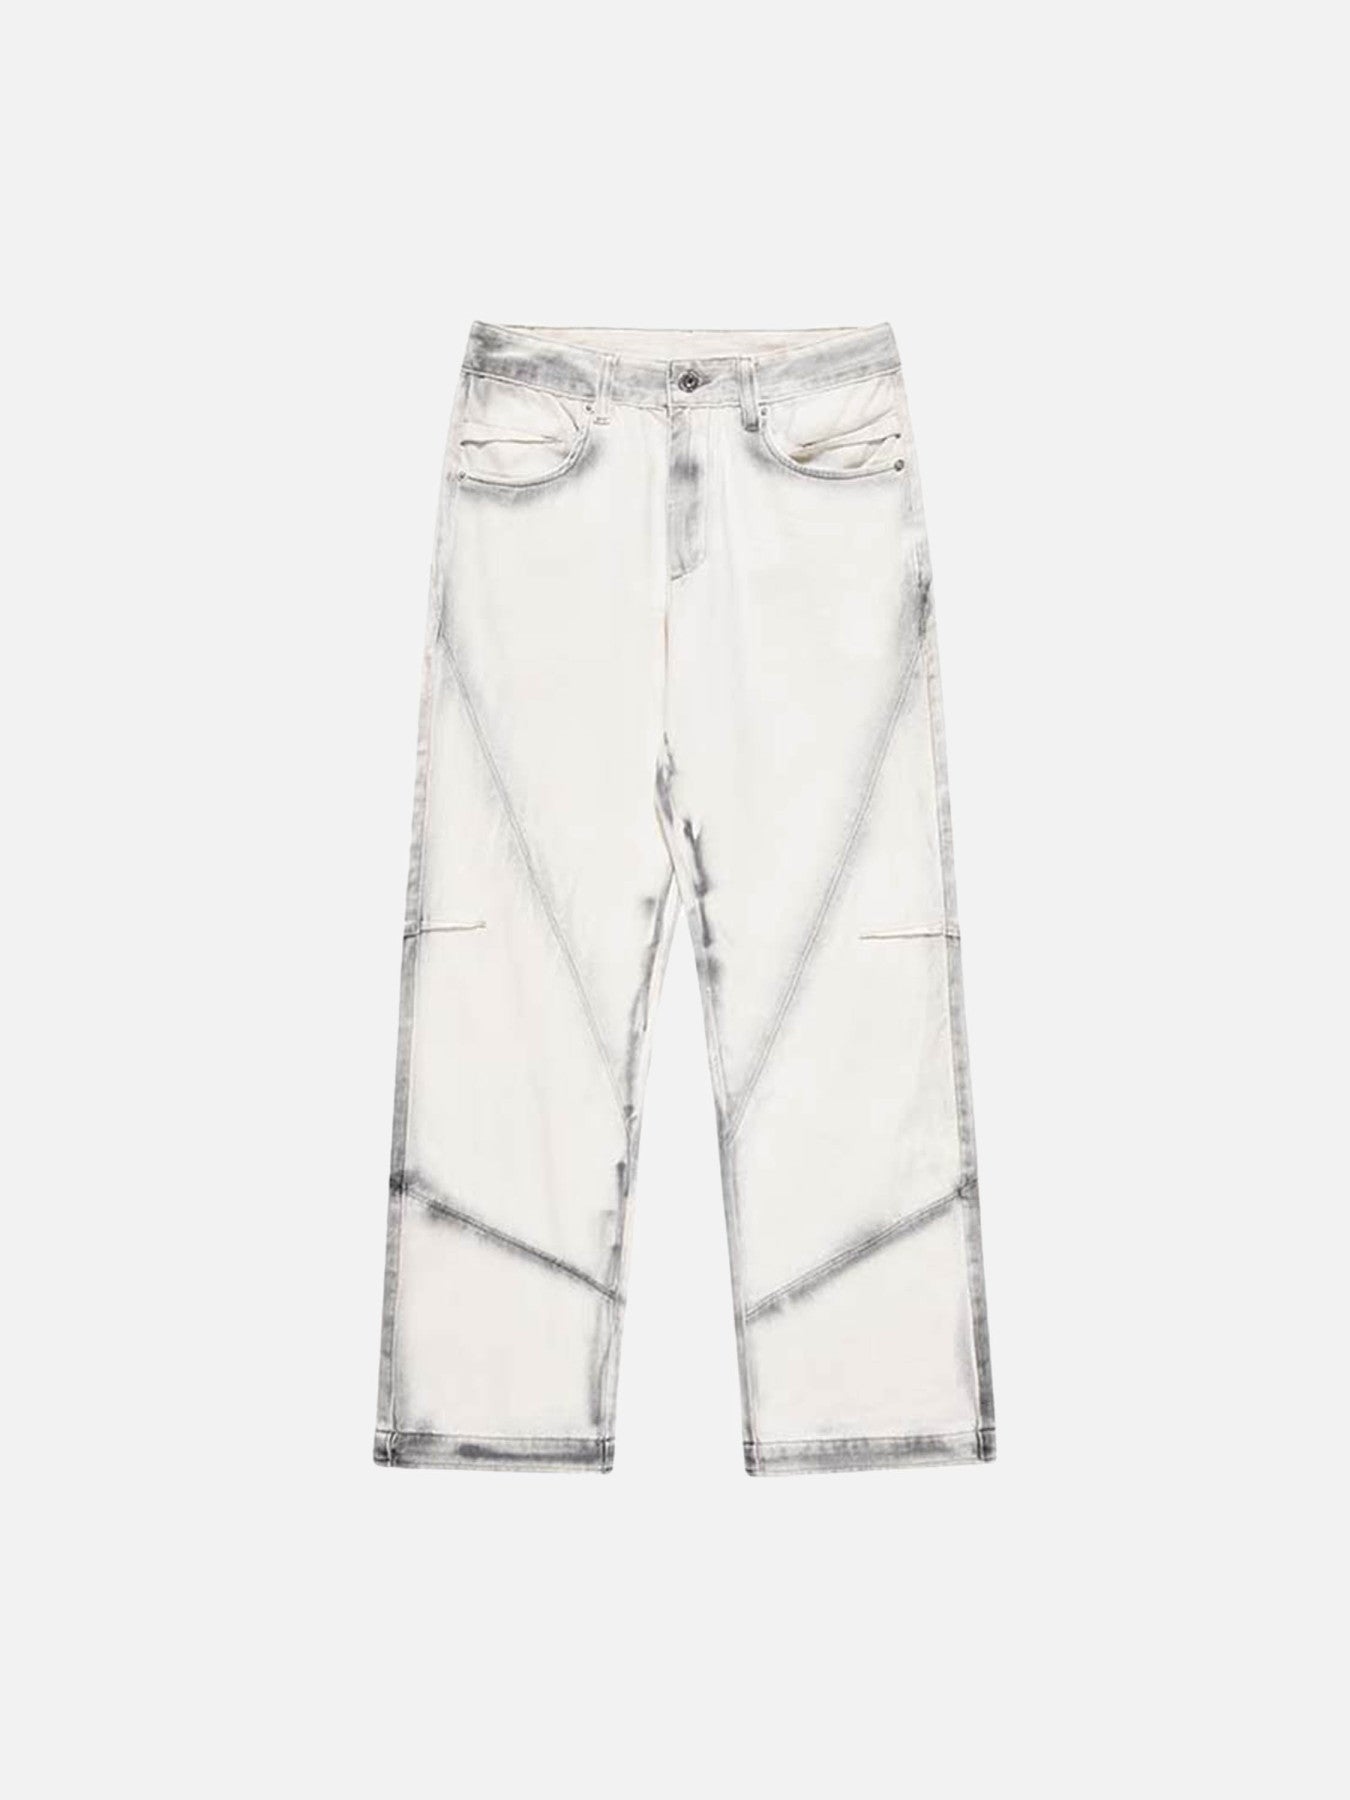 The Supermade Spray Dyed Straight Leg Jeans